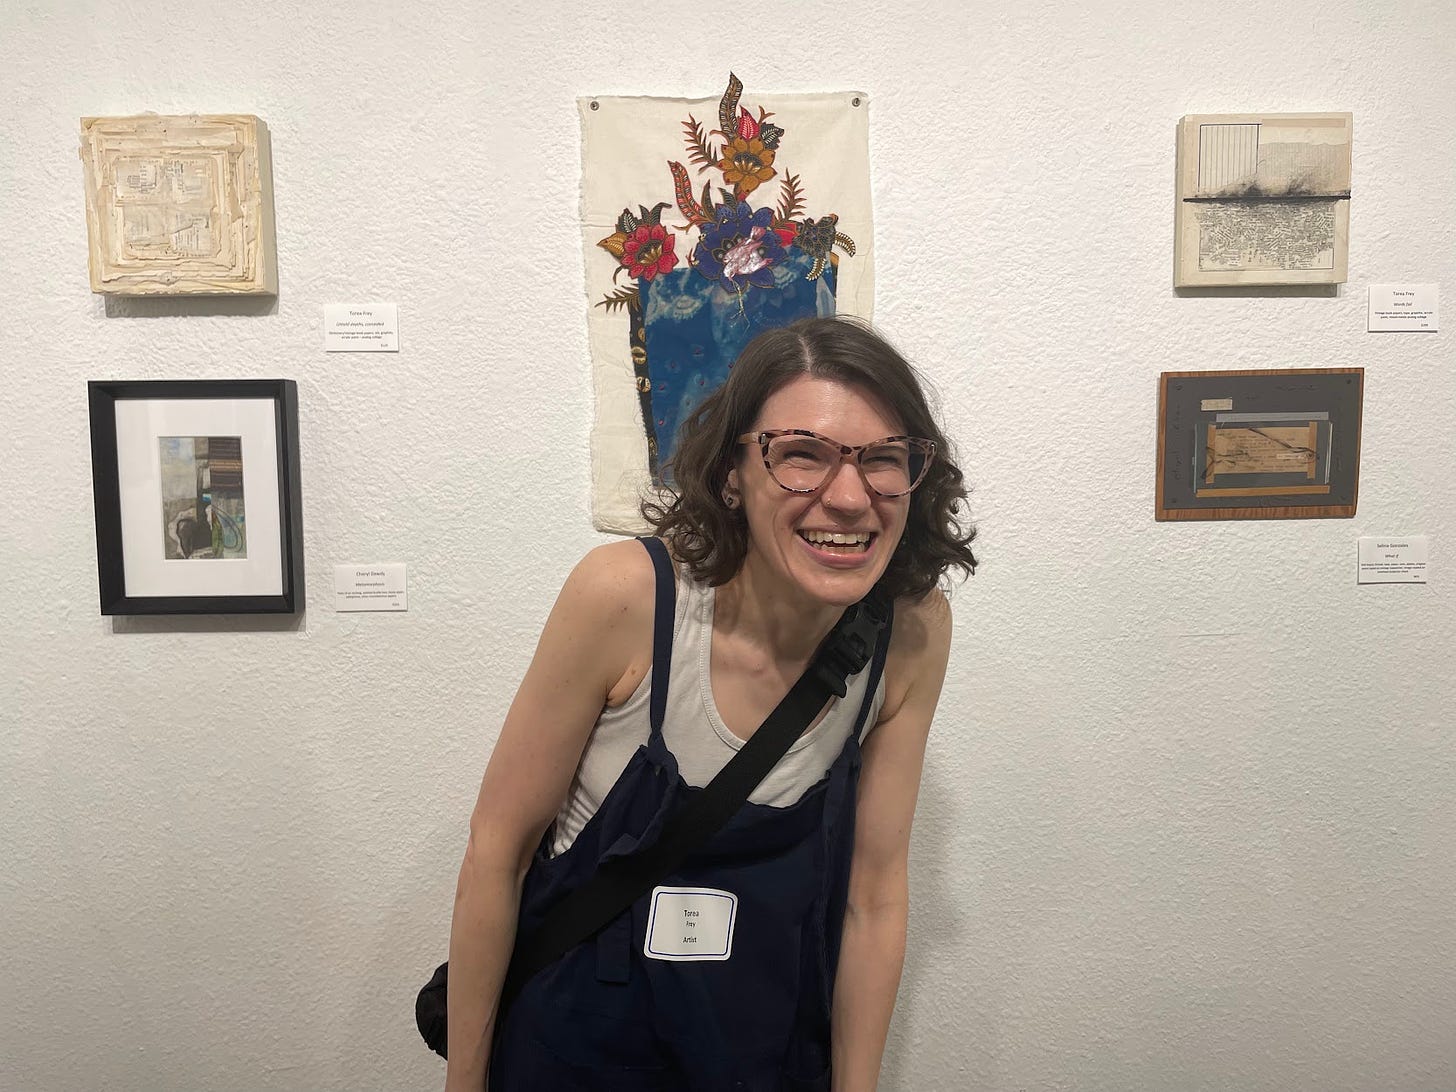 snapshot of a white woman smiling and laughing in front of 5 pieces of collage art of varying sizes